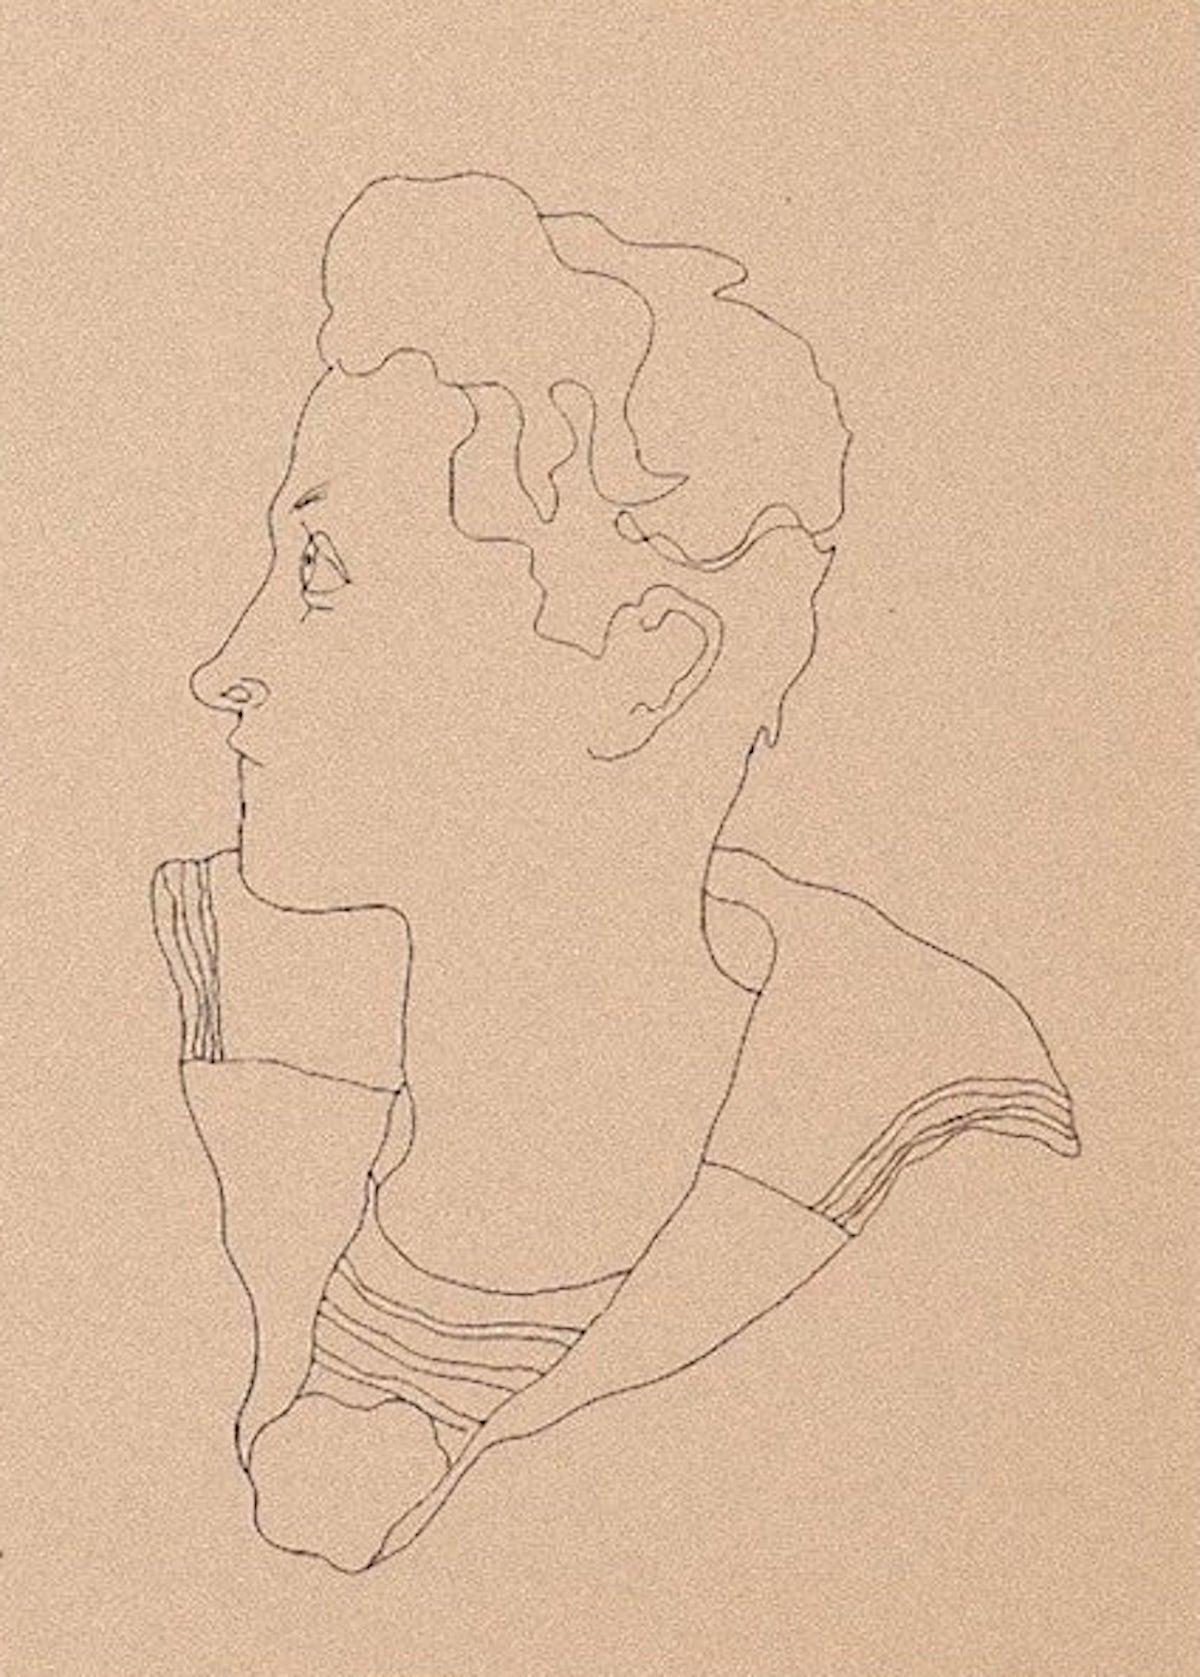 Young Boy is an original photolithograph artwork realized by Jean Cocteau (1889 -1963) in 1930 ca., French draftsman, poet, essayist, playwright, librettist, film director.

With the blue stamp of” Collezione Contessa Anna Labtitia Pecci” on the